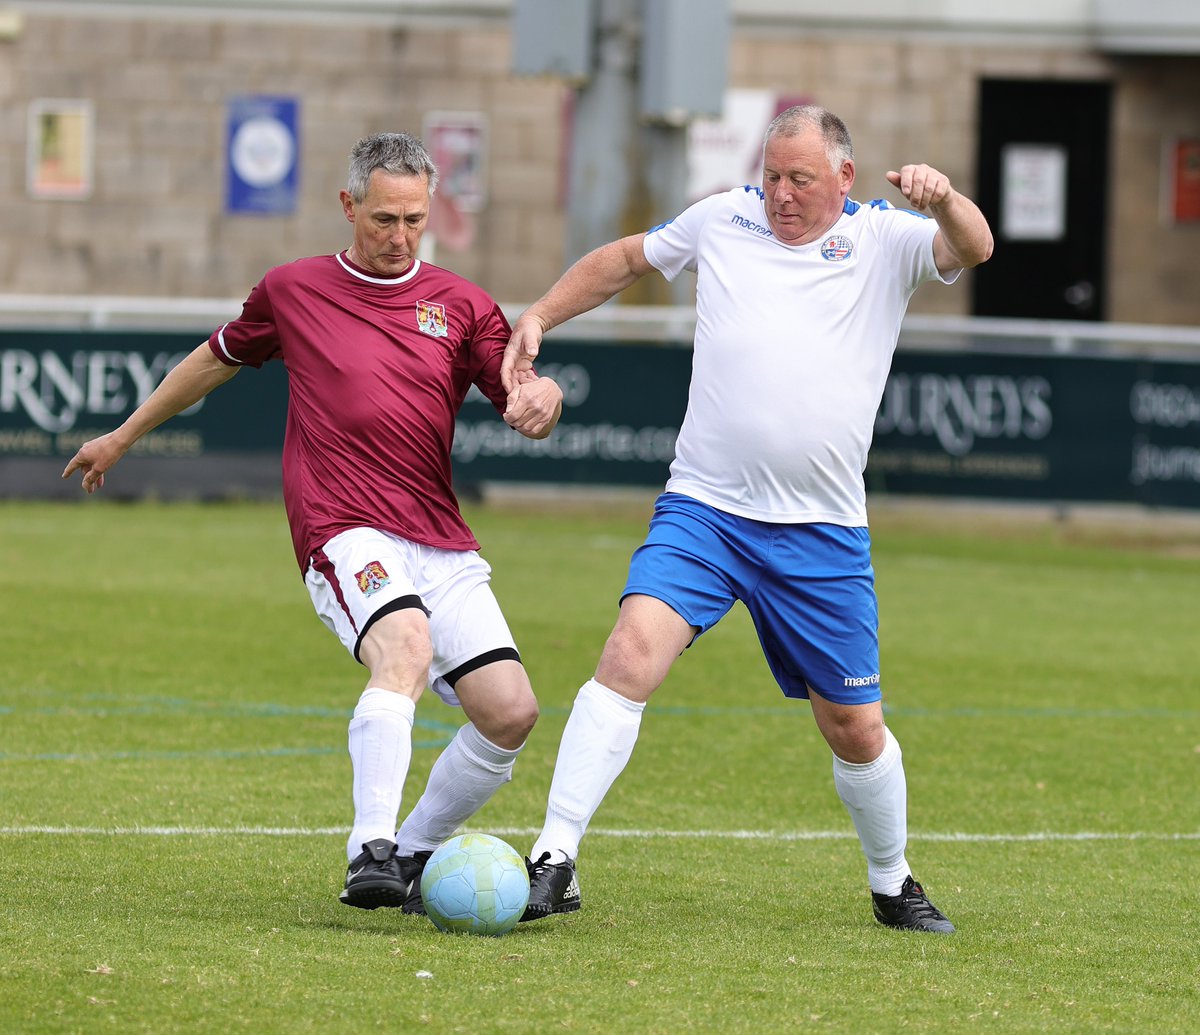 A brilliant day at our Annual Walking Football Tournament yesterday⚽️ Thank you once again to all the teams involved in a great competition & to our sponsors @YESSSElectrical🙌 We are ready for another day of football starting with our Mental Health Heads Up Festival💪